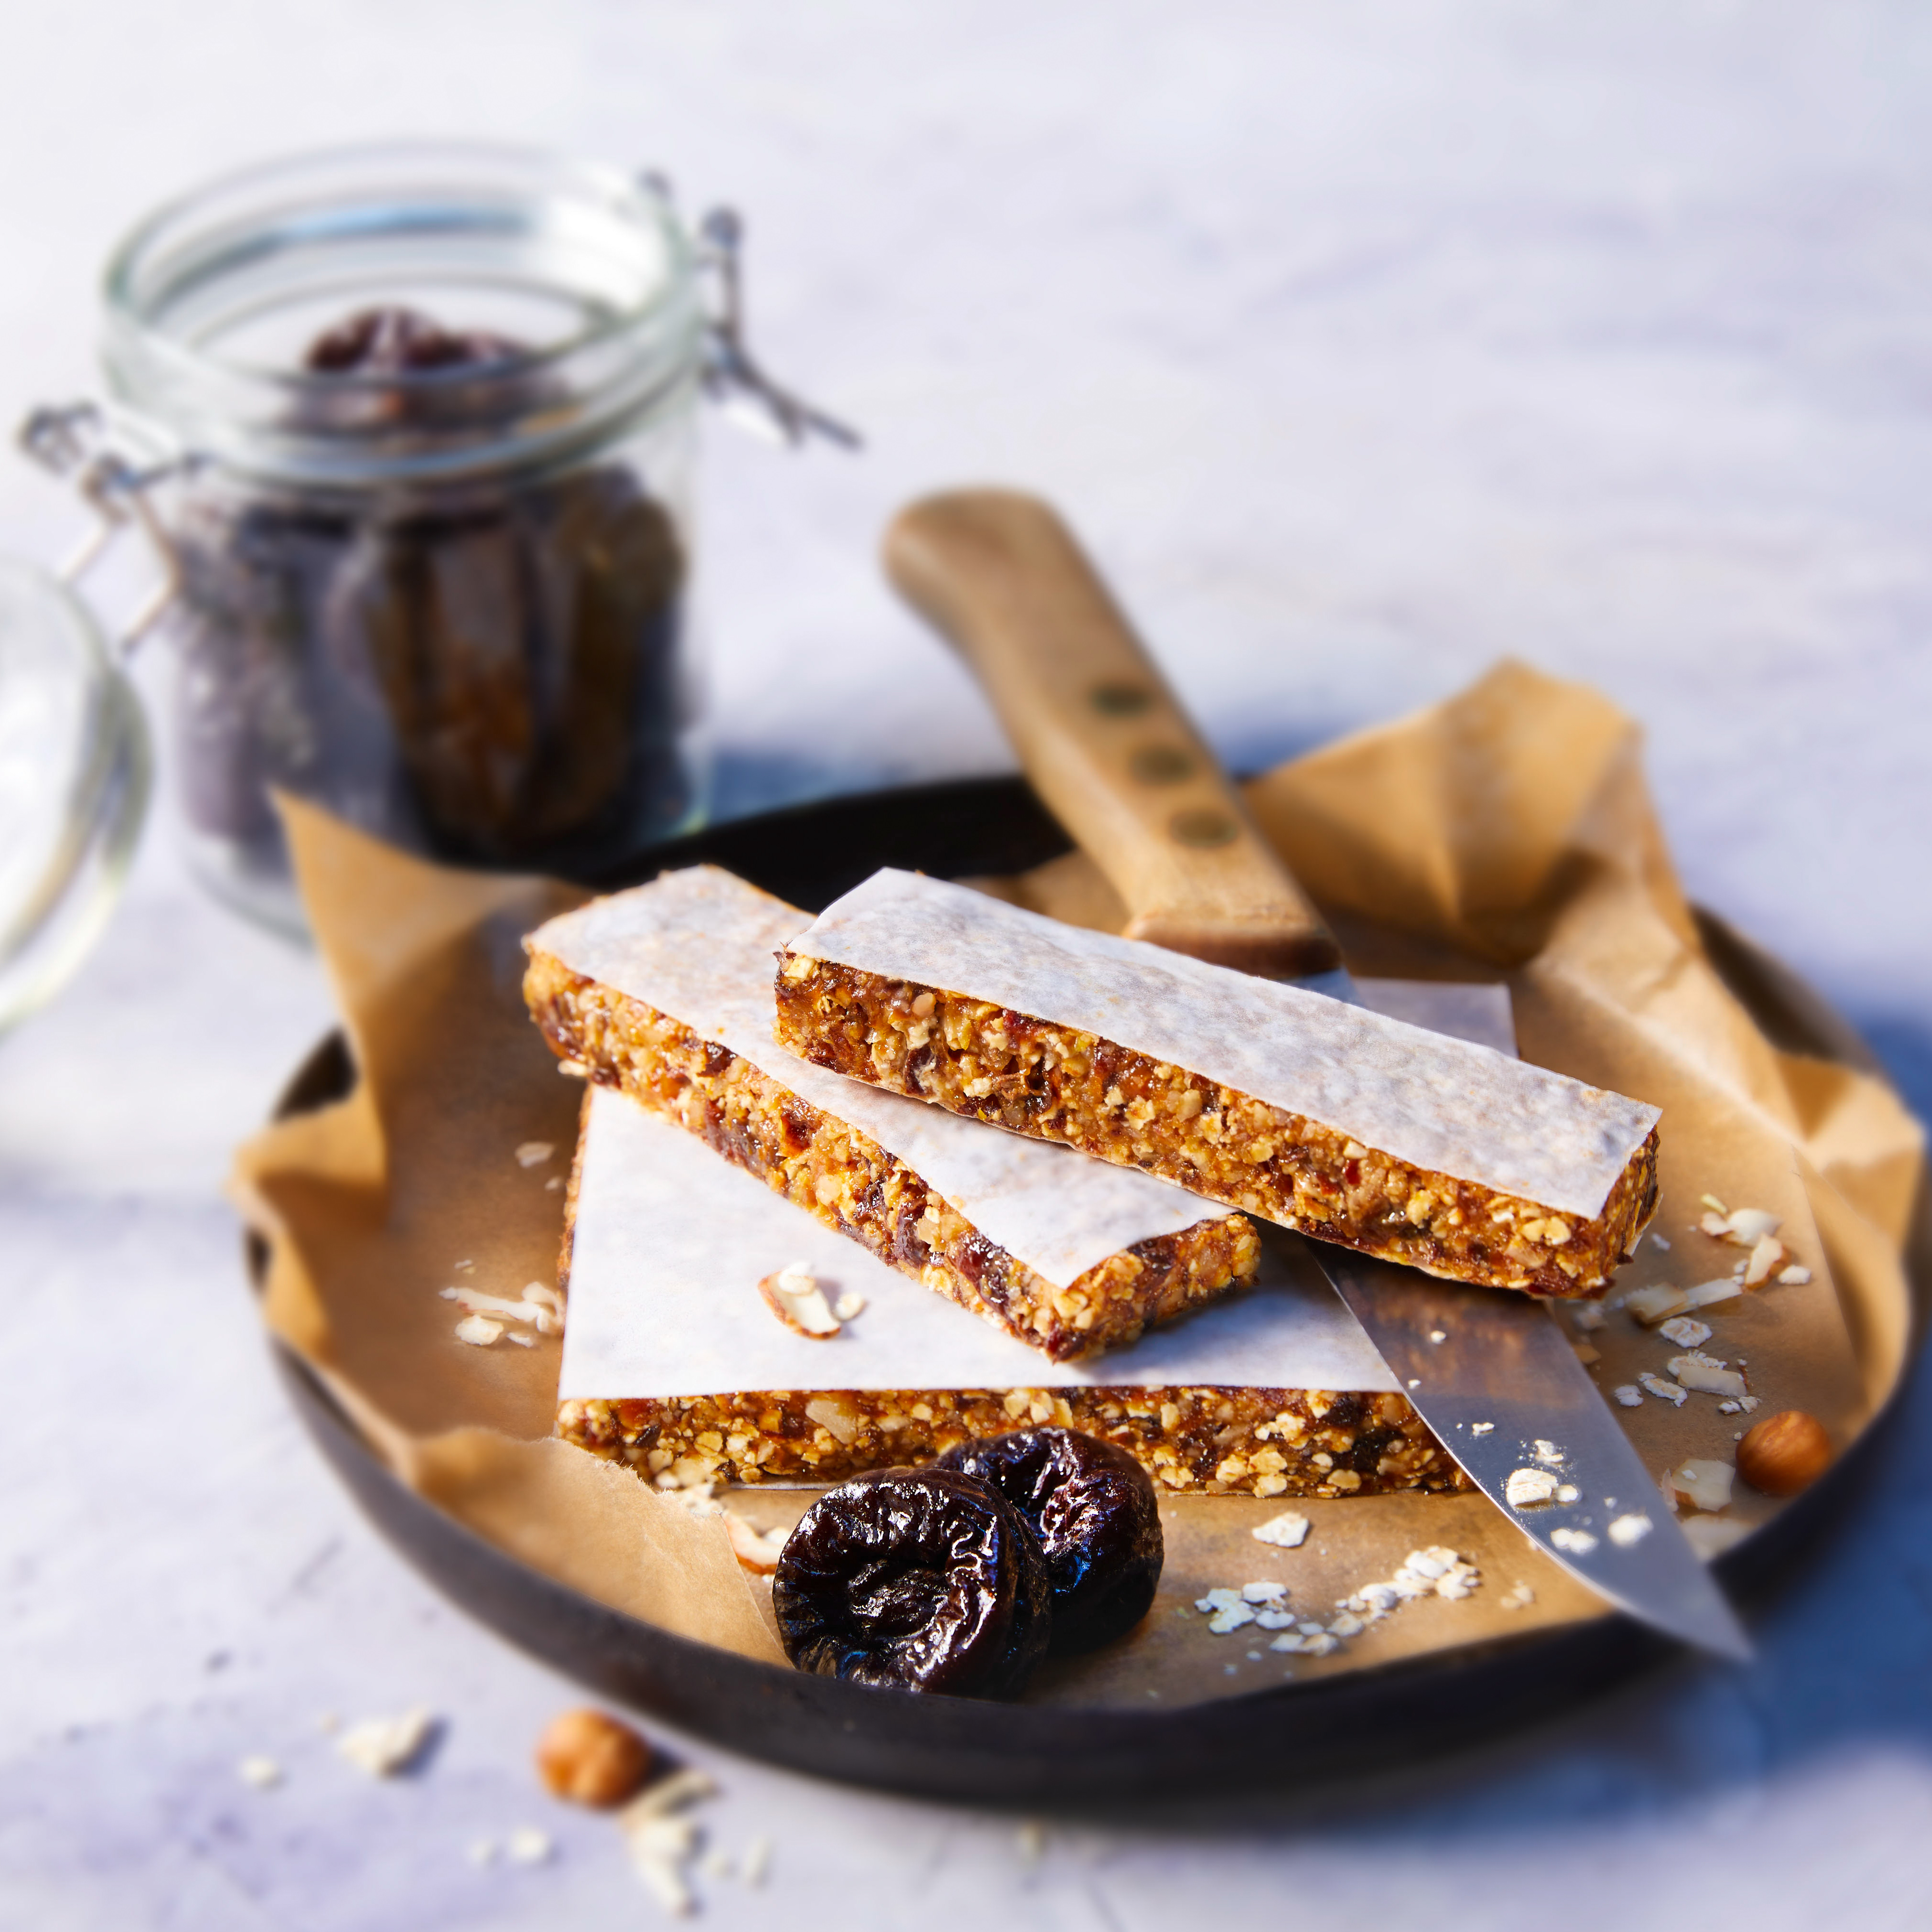 Looking for homemade, healthy snack bars that taste delicious? Try these fantastic, no-bake energy bars that can be made anytime and have wholesome, tasty snacks for hiking, biking, after work-outs or just for lunch boxes or afternoon snacks.